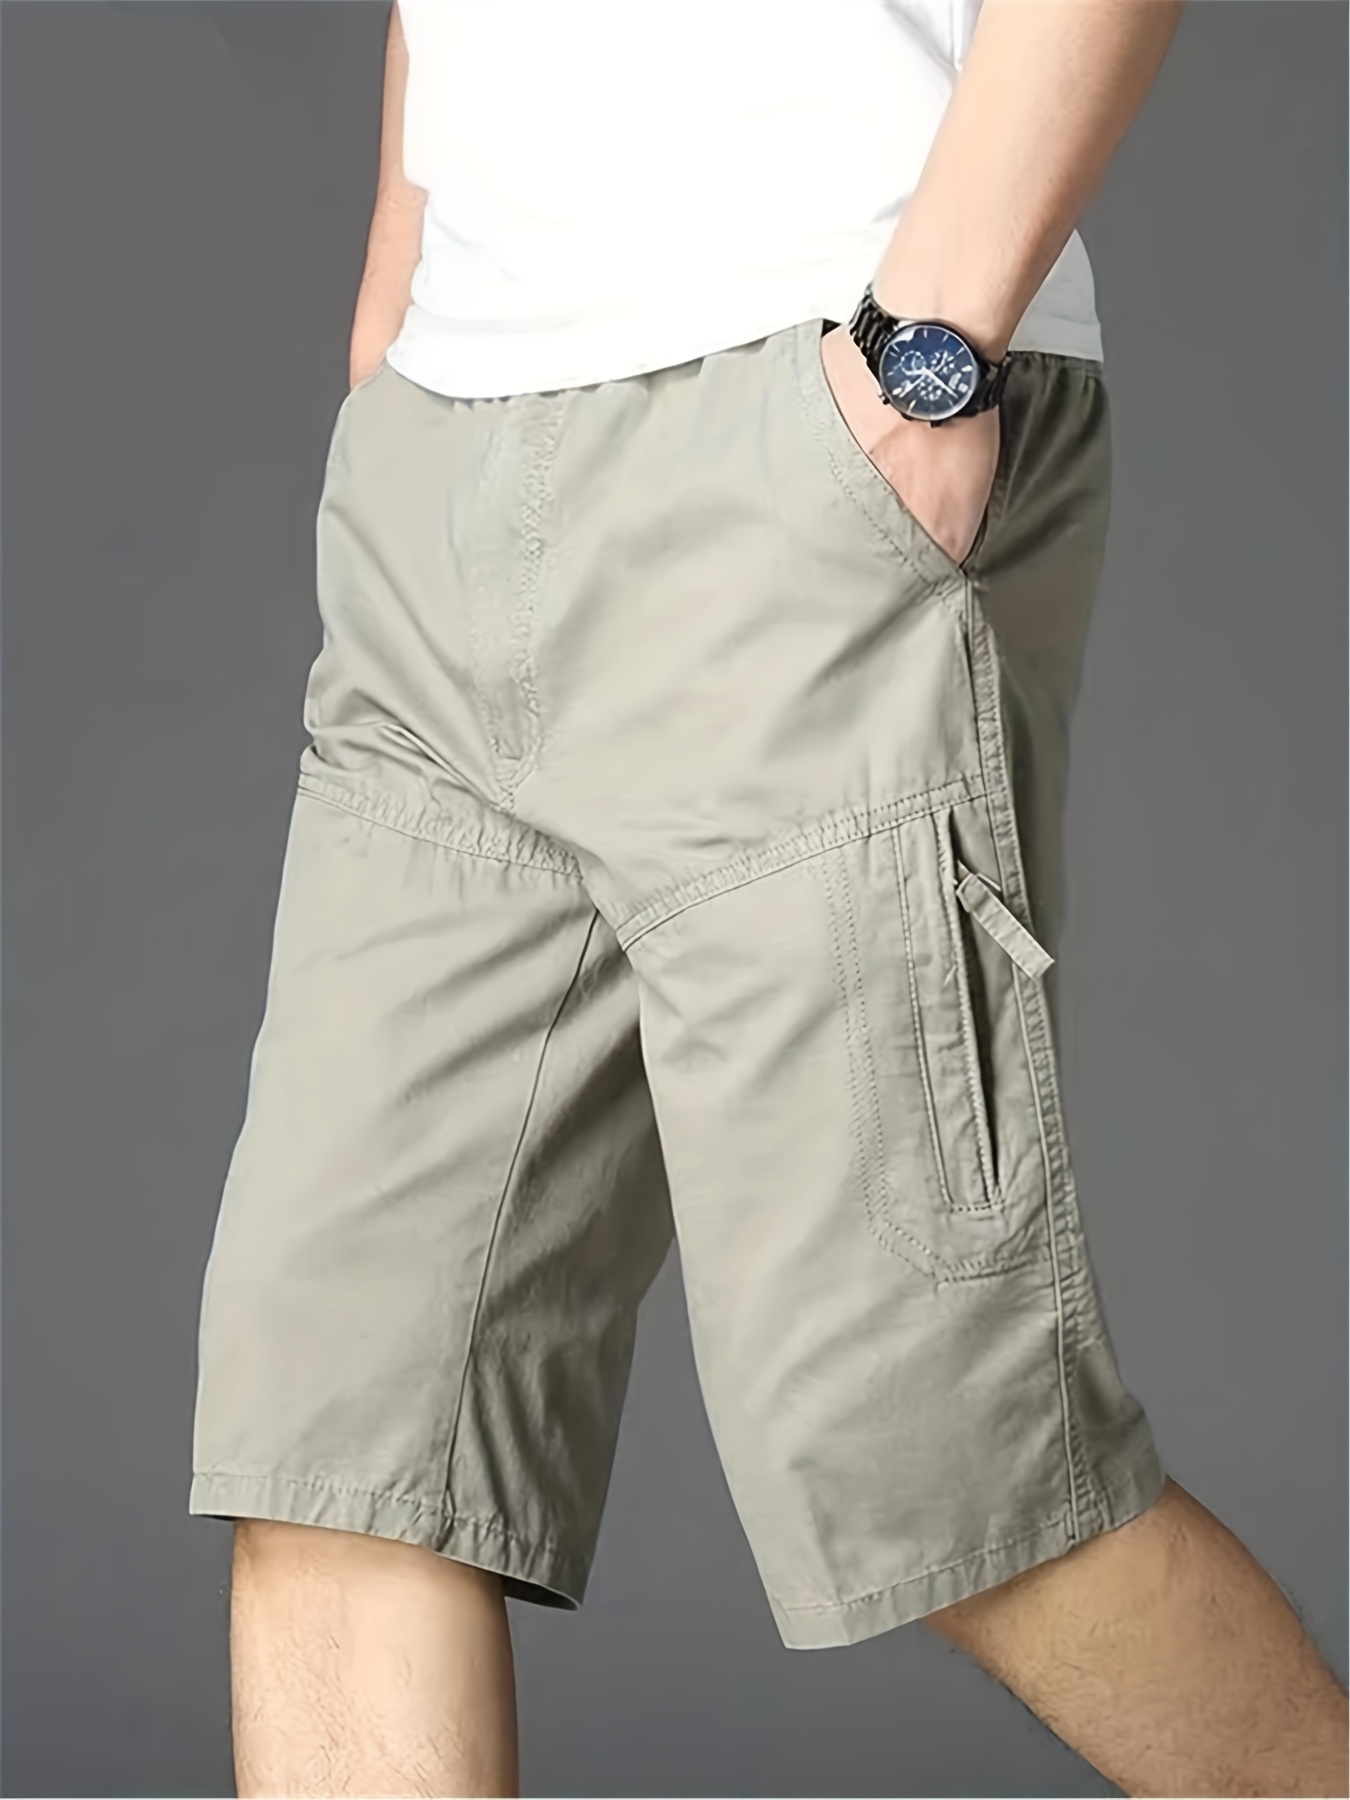 Straight Leg Pocket Solid Cargo Shorts Straight Leg, Men's Cotton Loose Zip Fishing Running Summer Mens Clothing Casual Pants For Outdoor